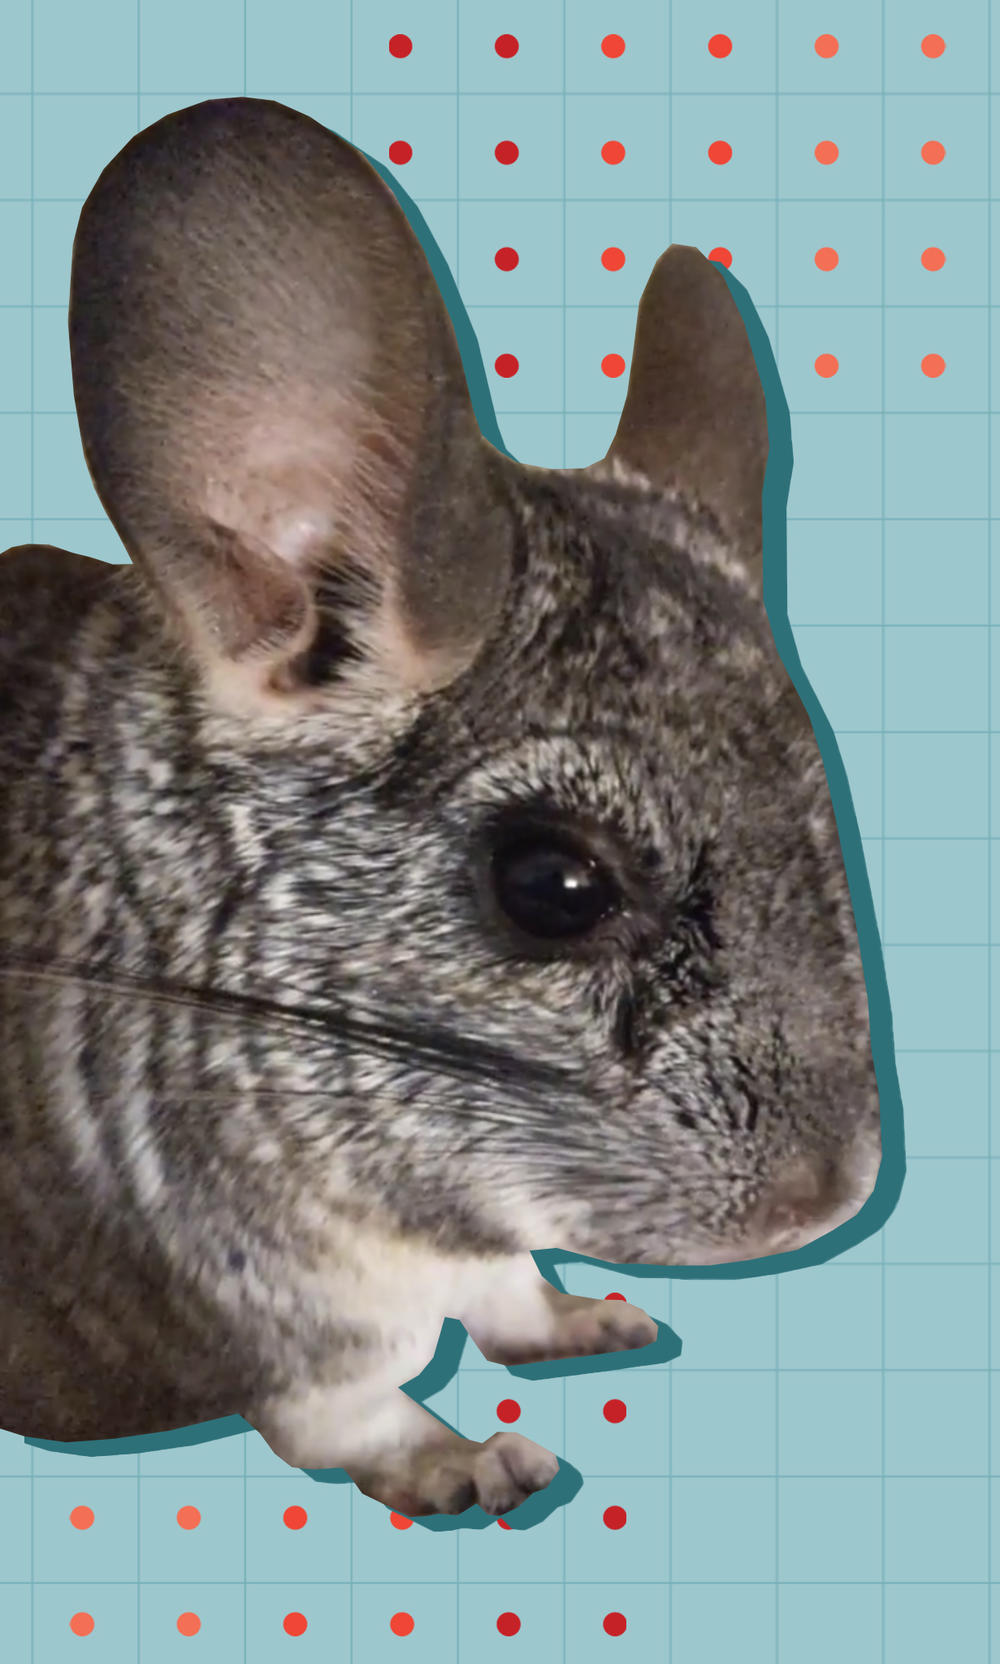 A pet chinchilla, Dumptruck, helped Devon Price realize that you don't have to be productive to earn the right to exist.